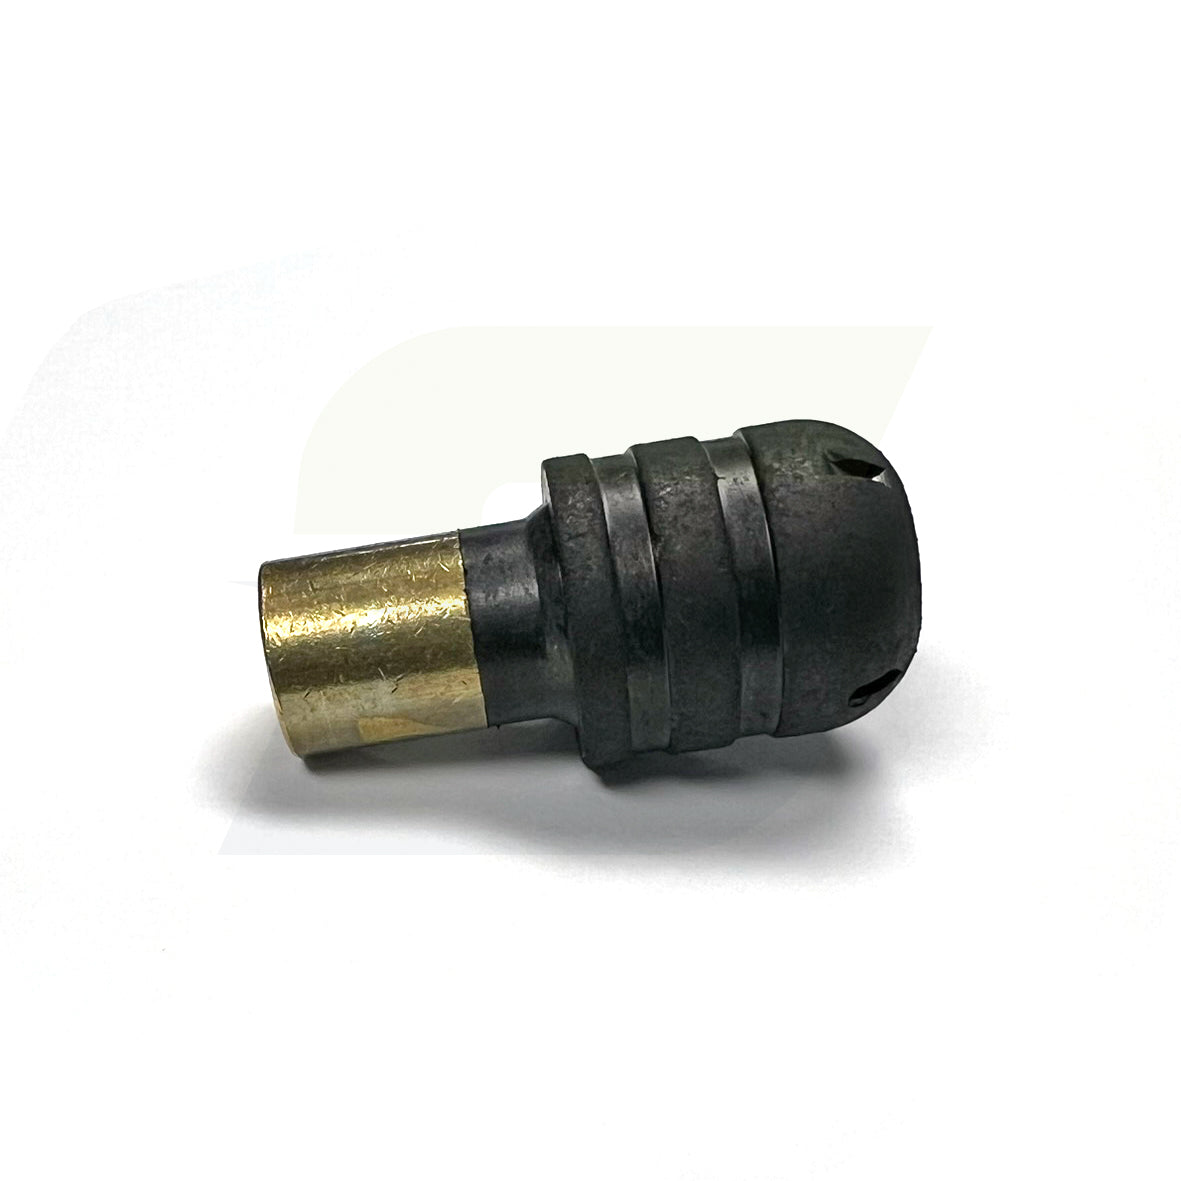 10106 - Replacement Plunger For Y1 & Y2 Hydrants